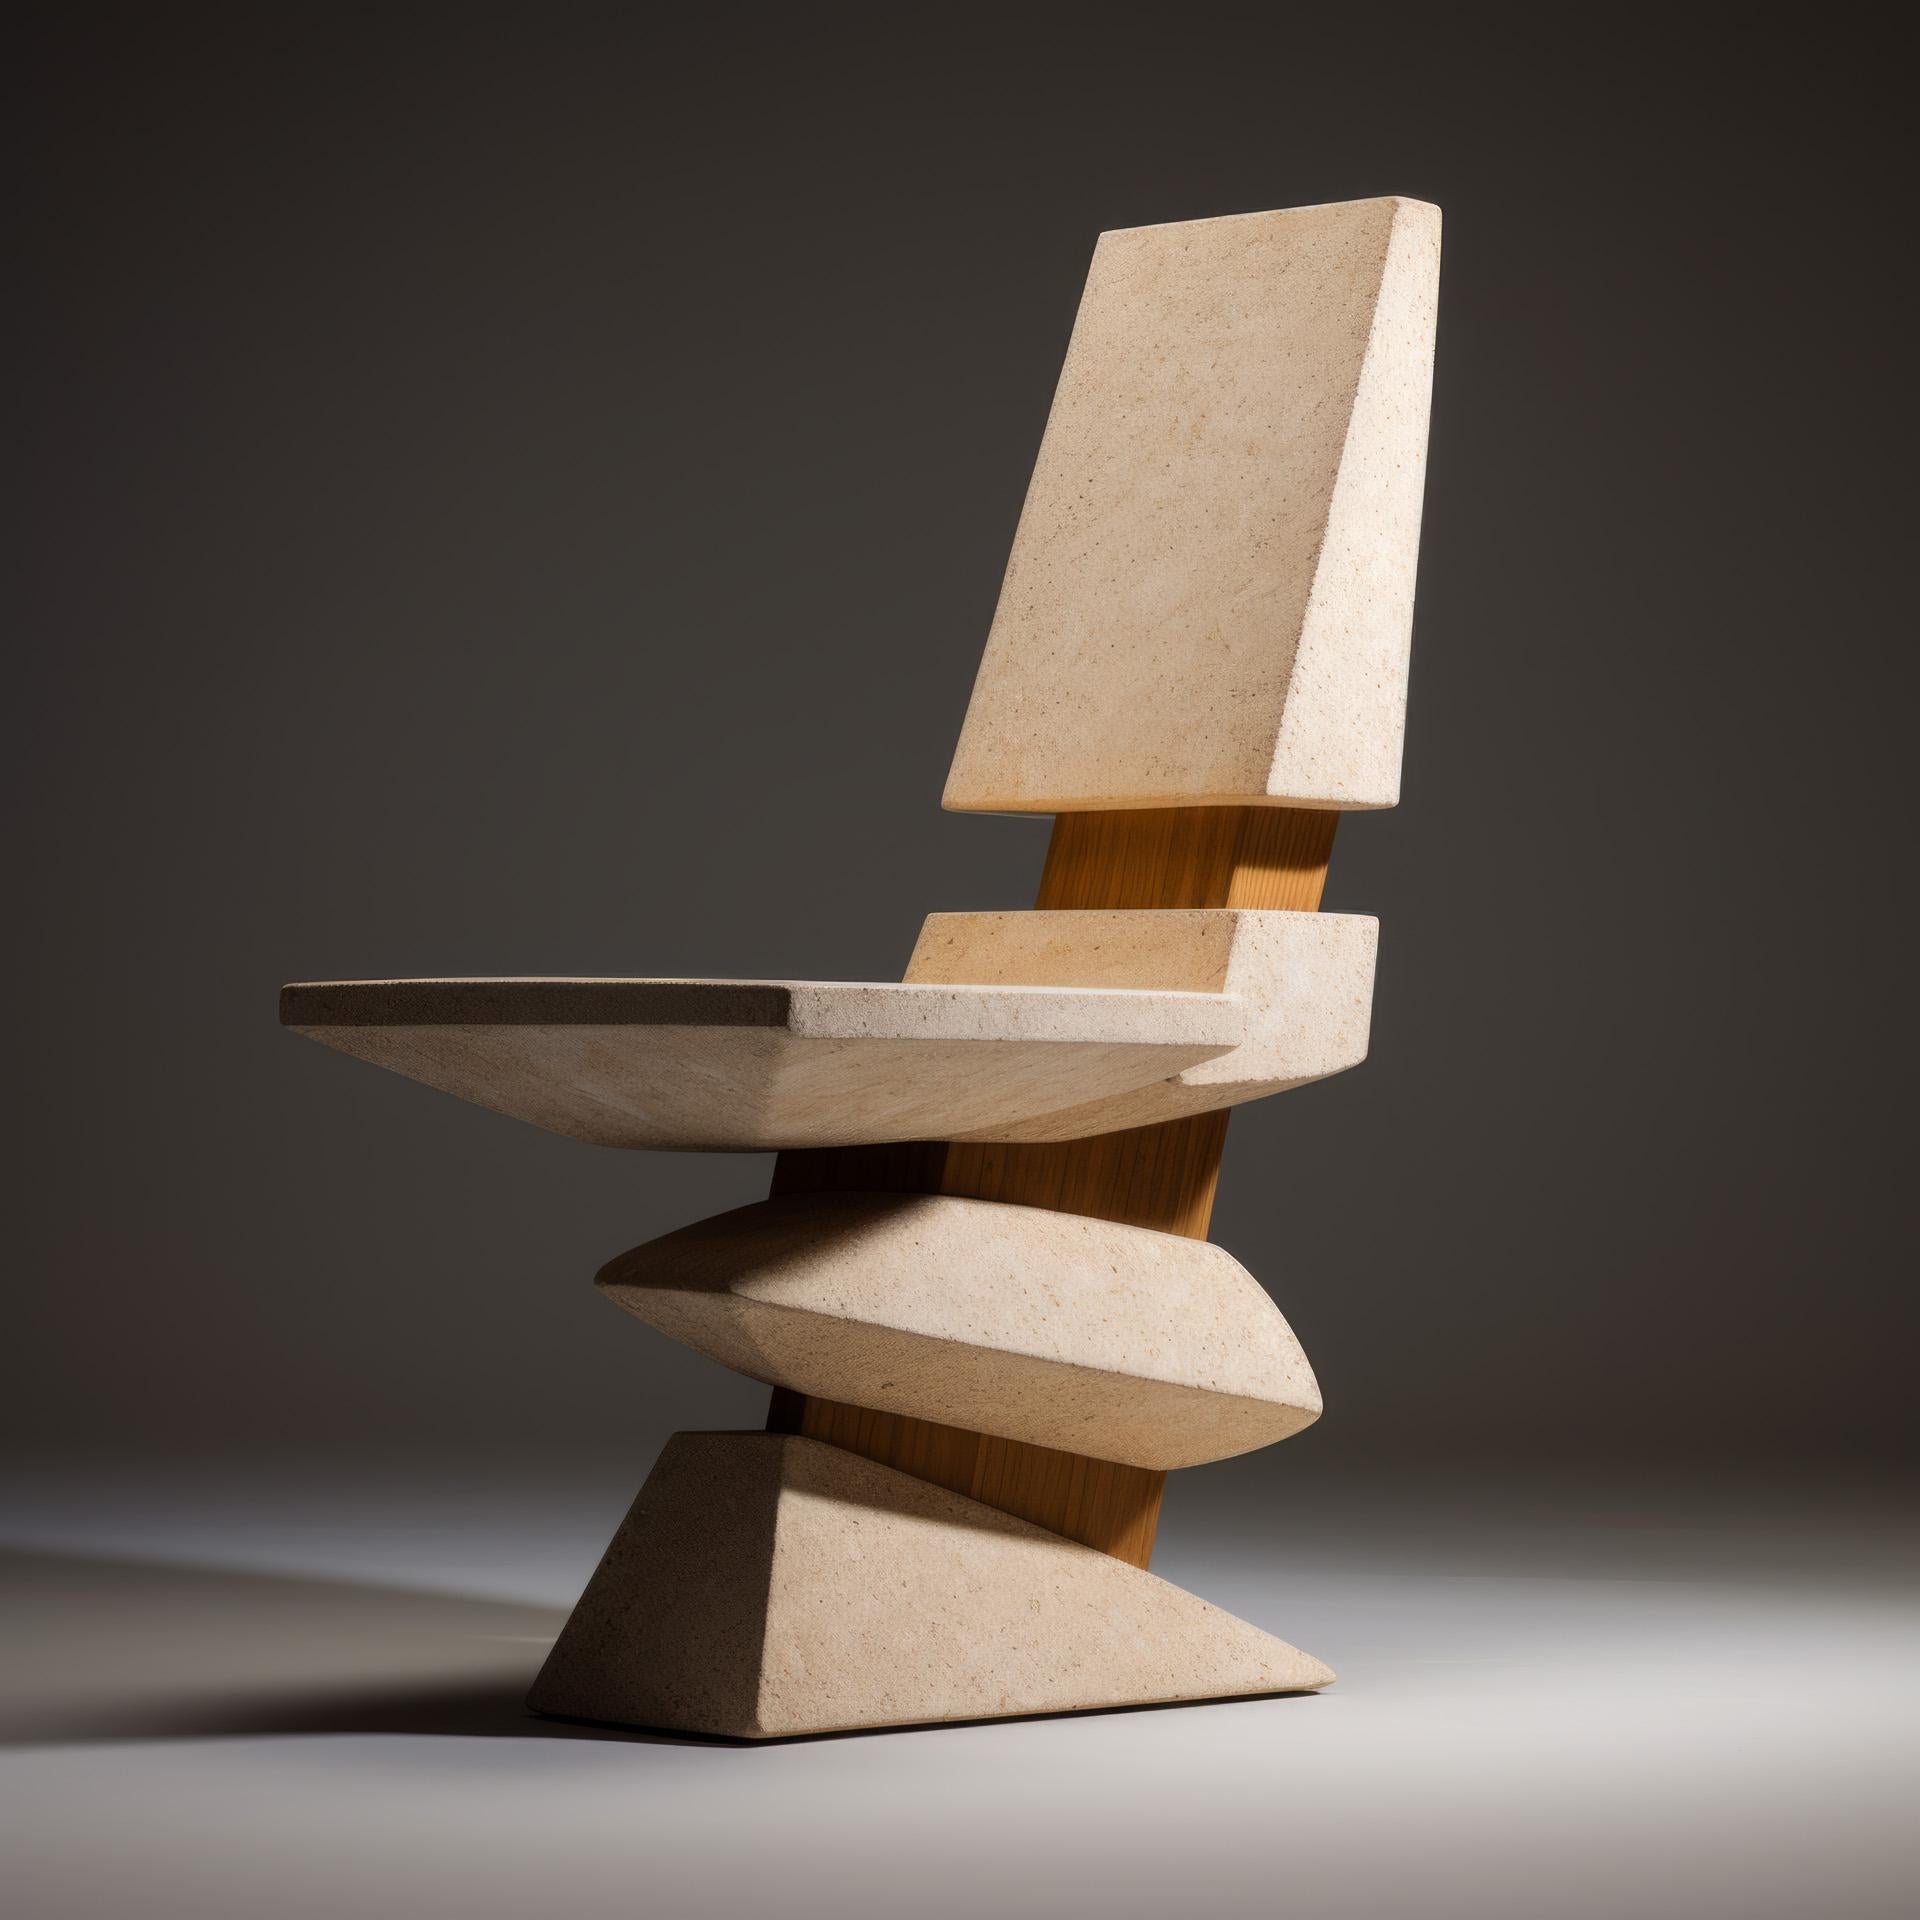 Fen Hua Chair by objective OBJECT Studio
Dimensions: D 48 x W 56 x H 95 cm 
Materials: Limestone, wood.

objective OBJECT
an embodiment of our architectural ethos.

We represent an unwavering dedication to truth, impartiality, and the profound